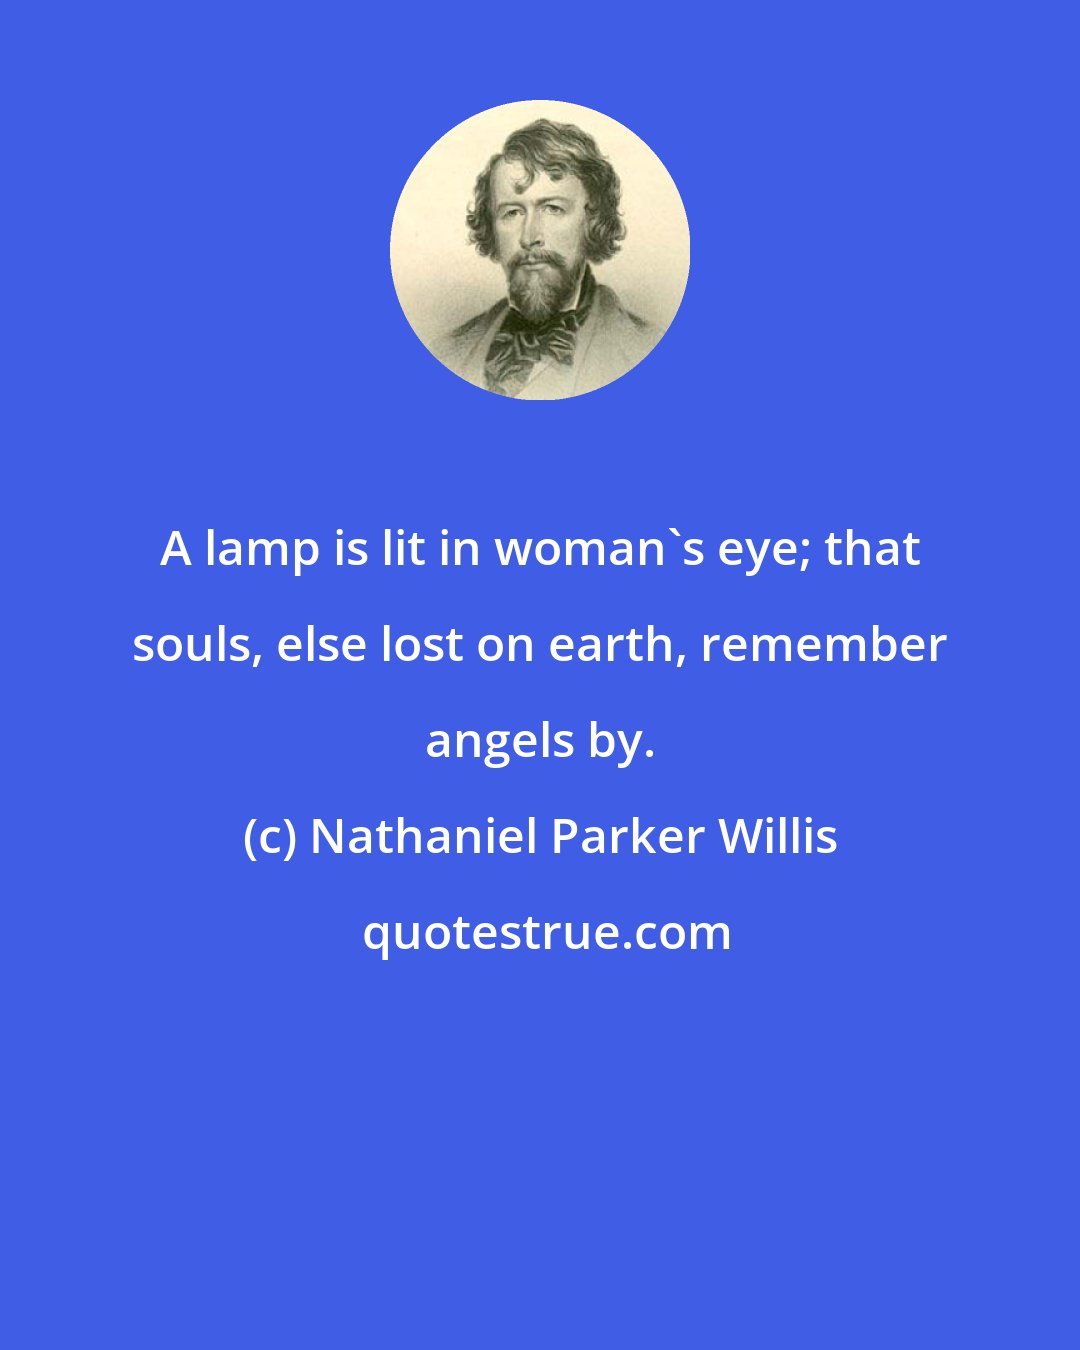 Nathaniel Parker Willis: A lamp is lit in woman's eye; that souls, else lost on earth, remember angels by.